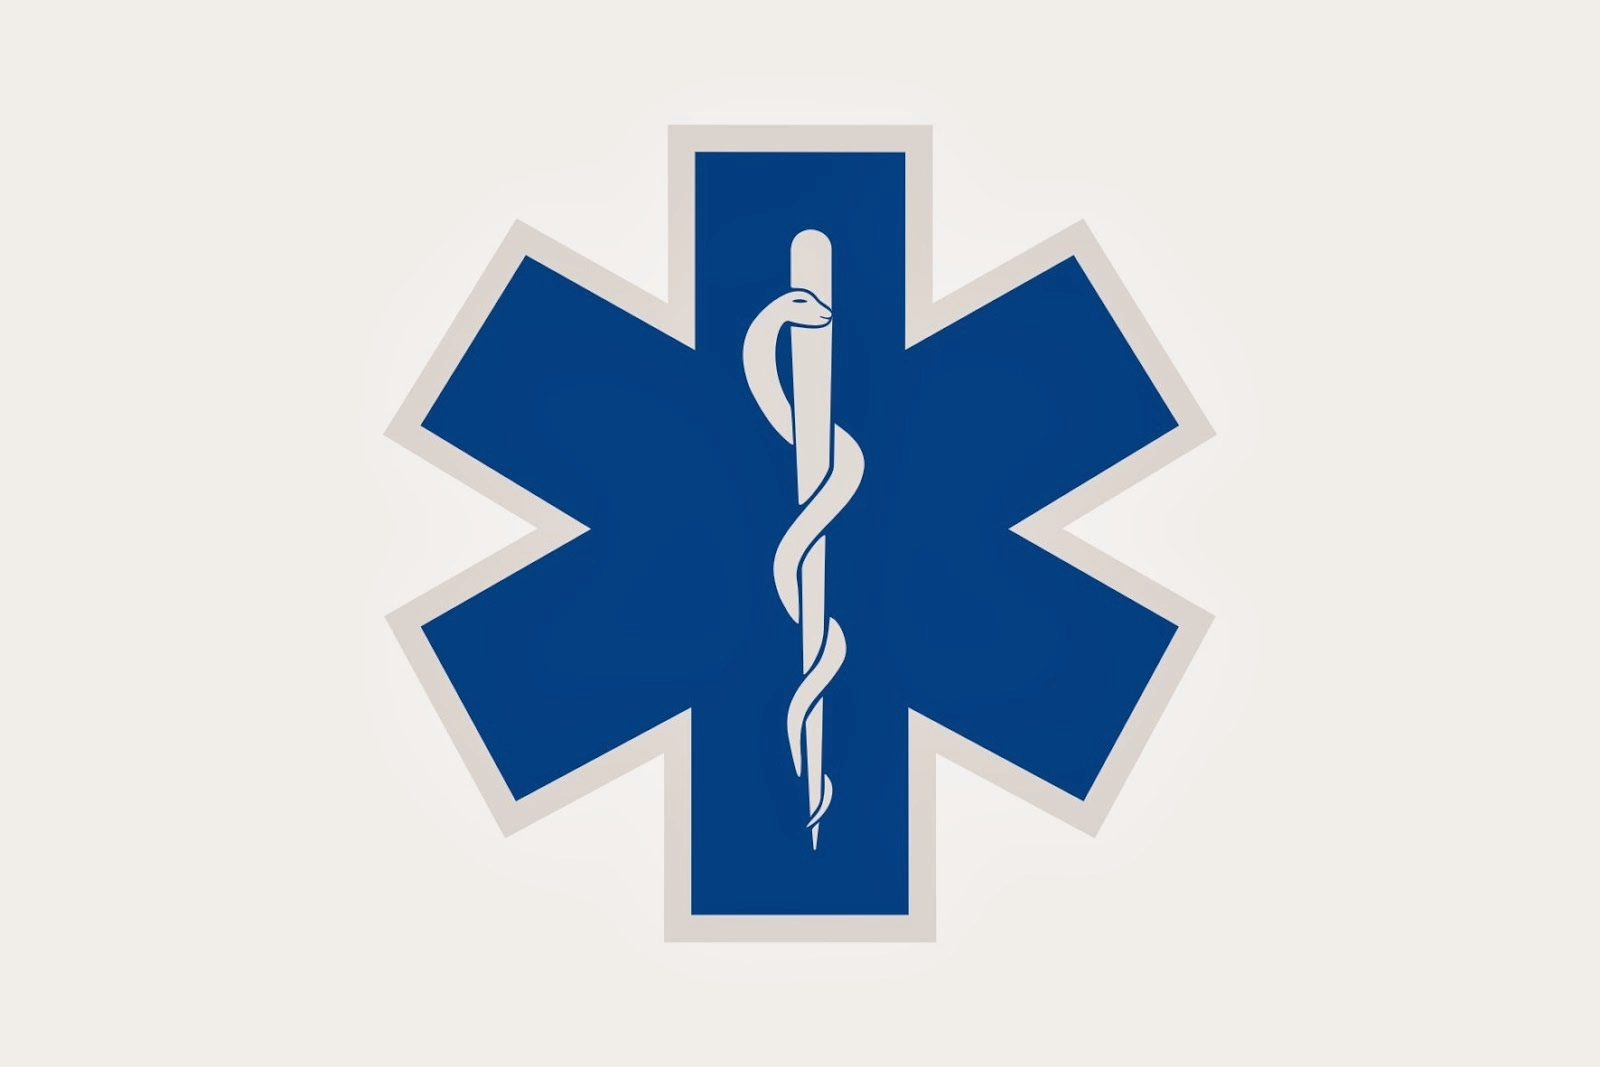 TOP-10 EMT Social Media Accounts to Follow: Get inspired and stay connected